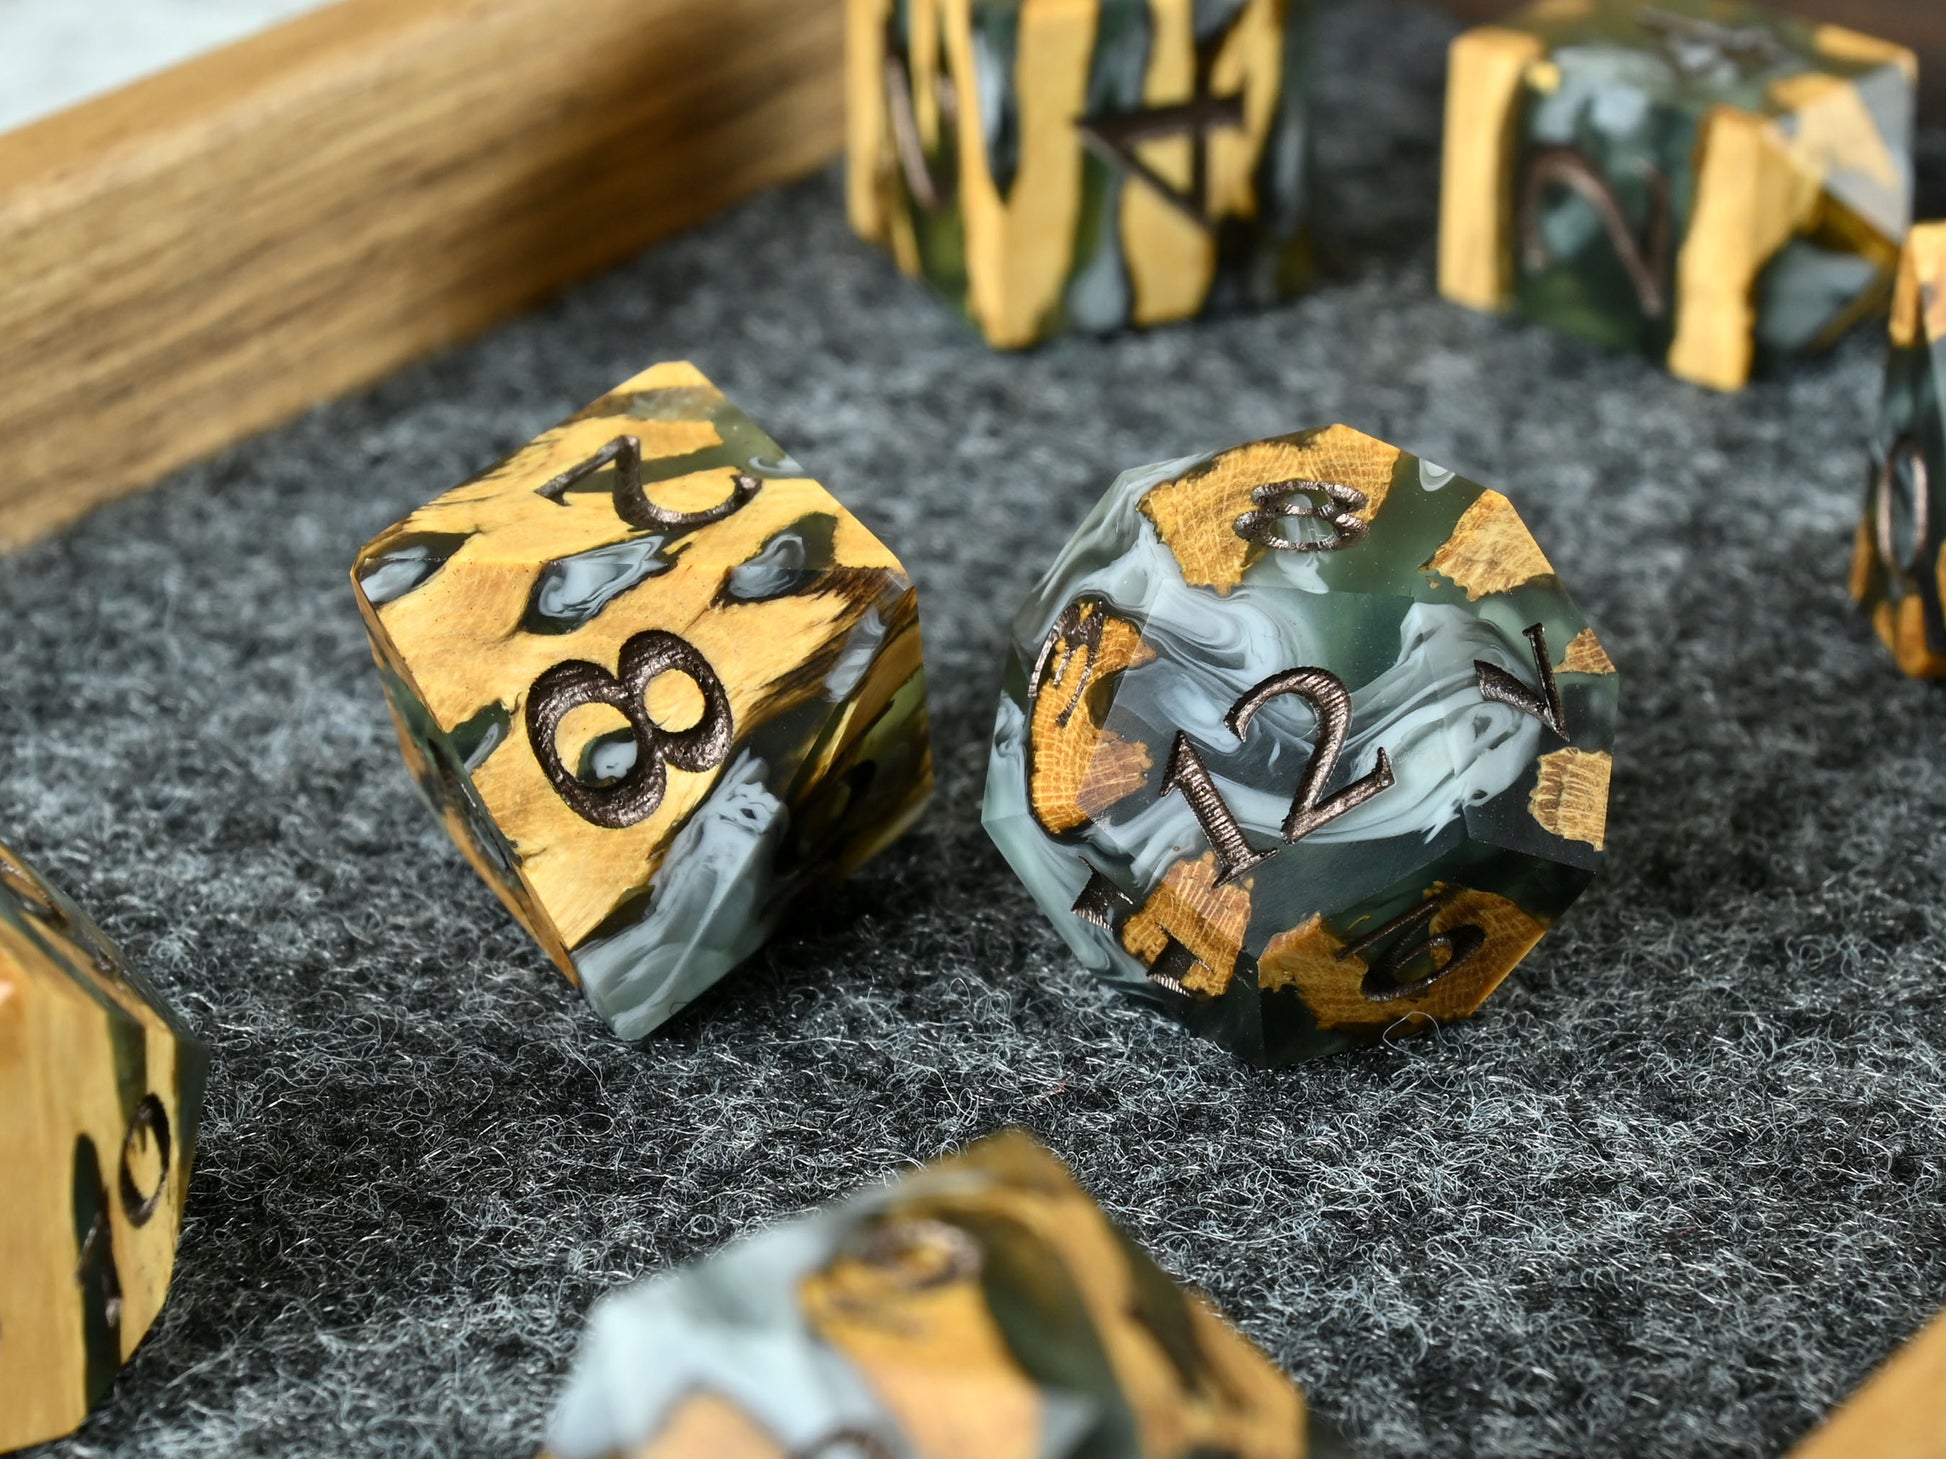 Creeping rot cholla wood and resin hybrid dice set for D&D ttrpg.